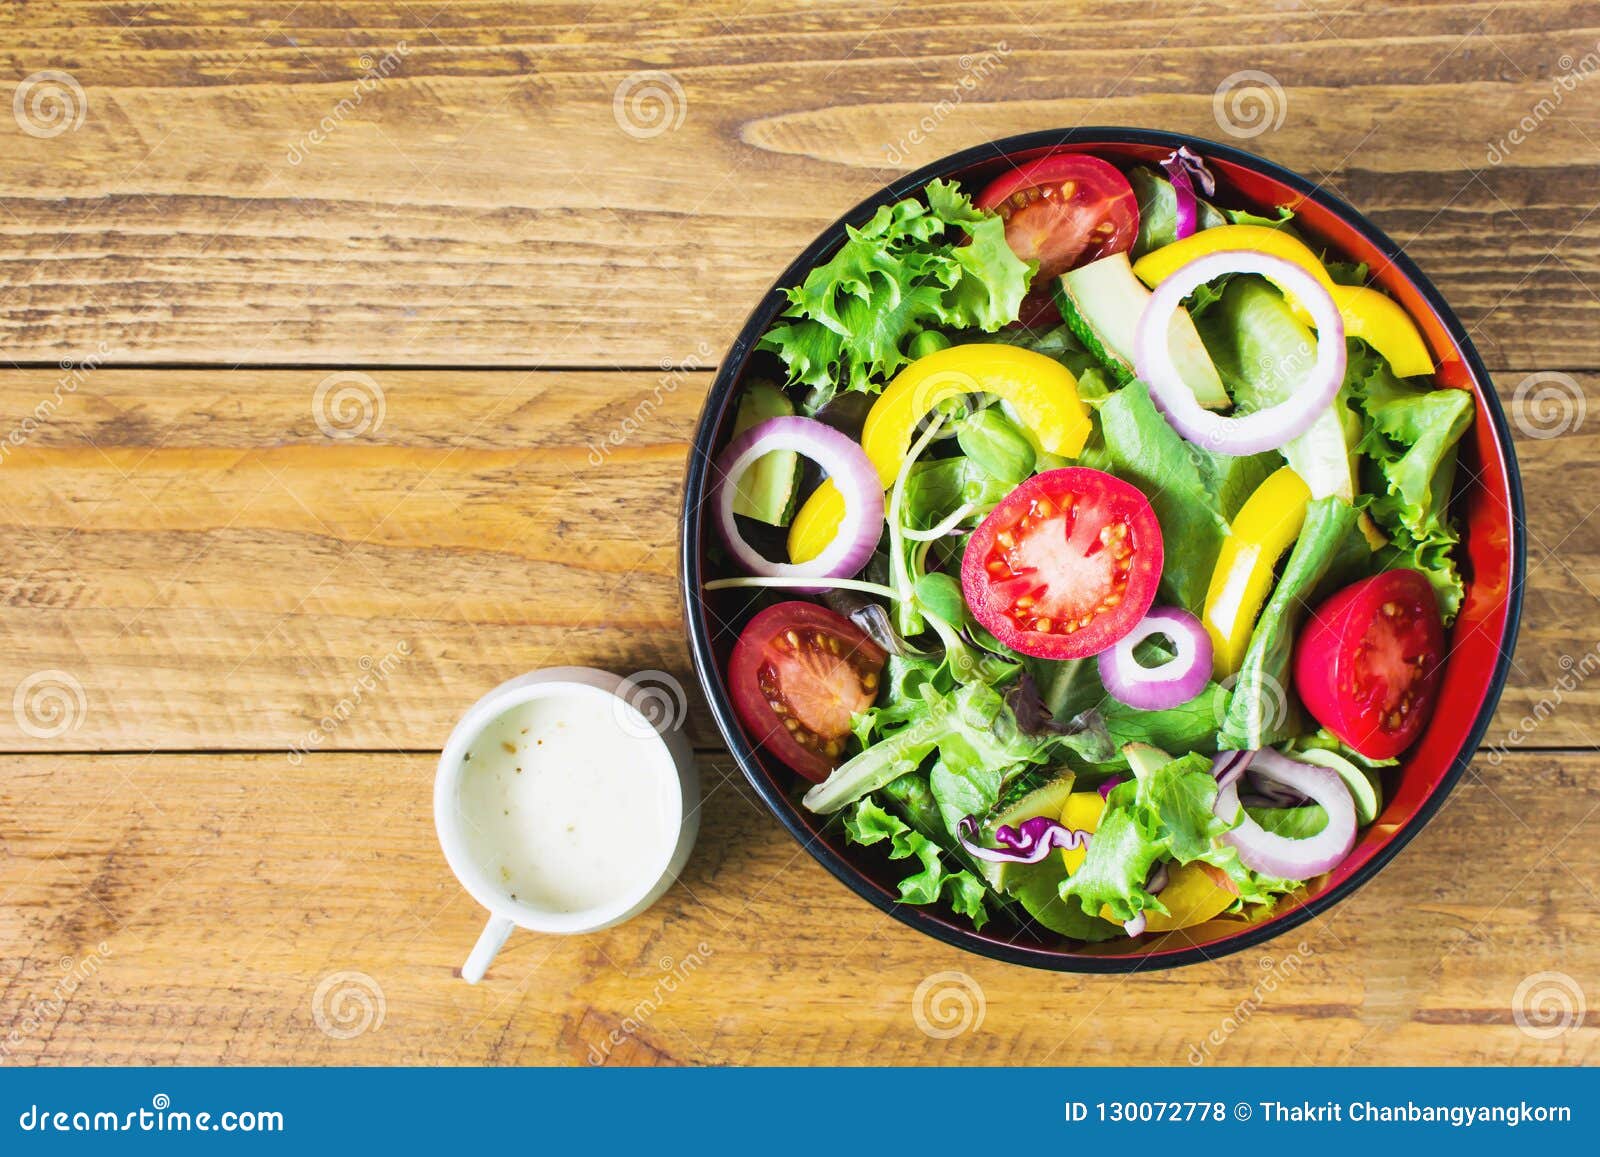 Salad on wooden floor stock photo. Image of meal, colorful - 130072778